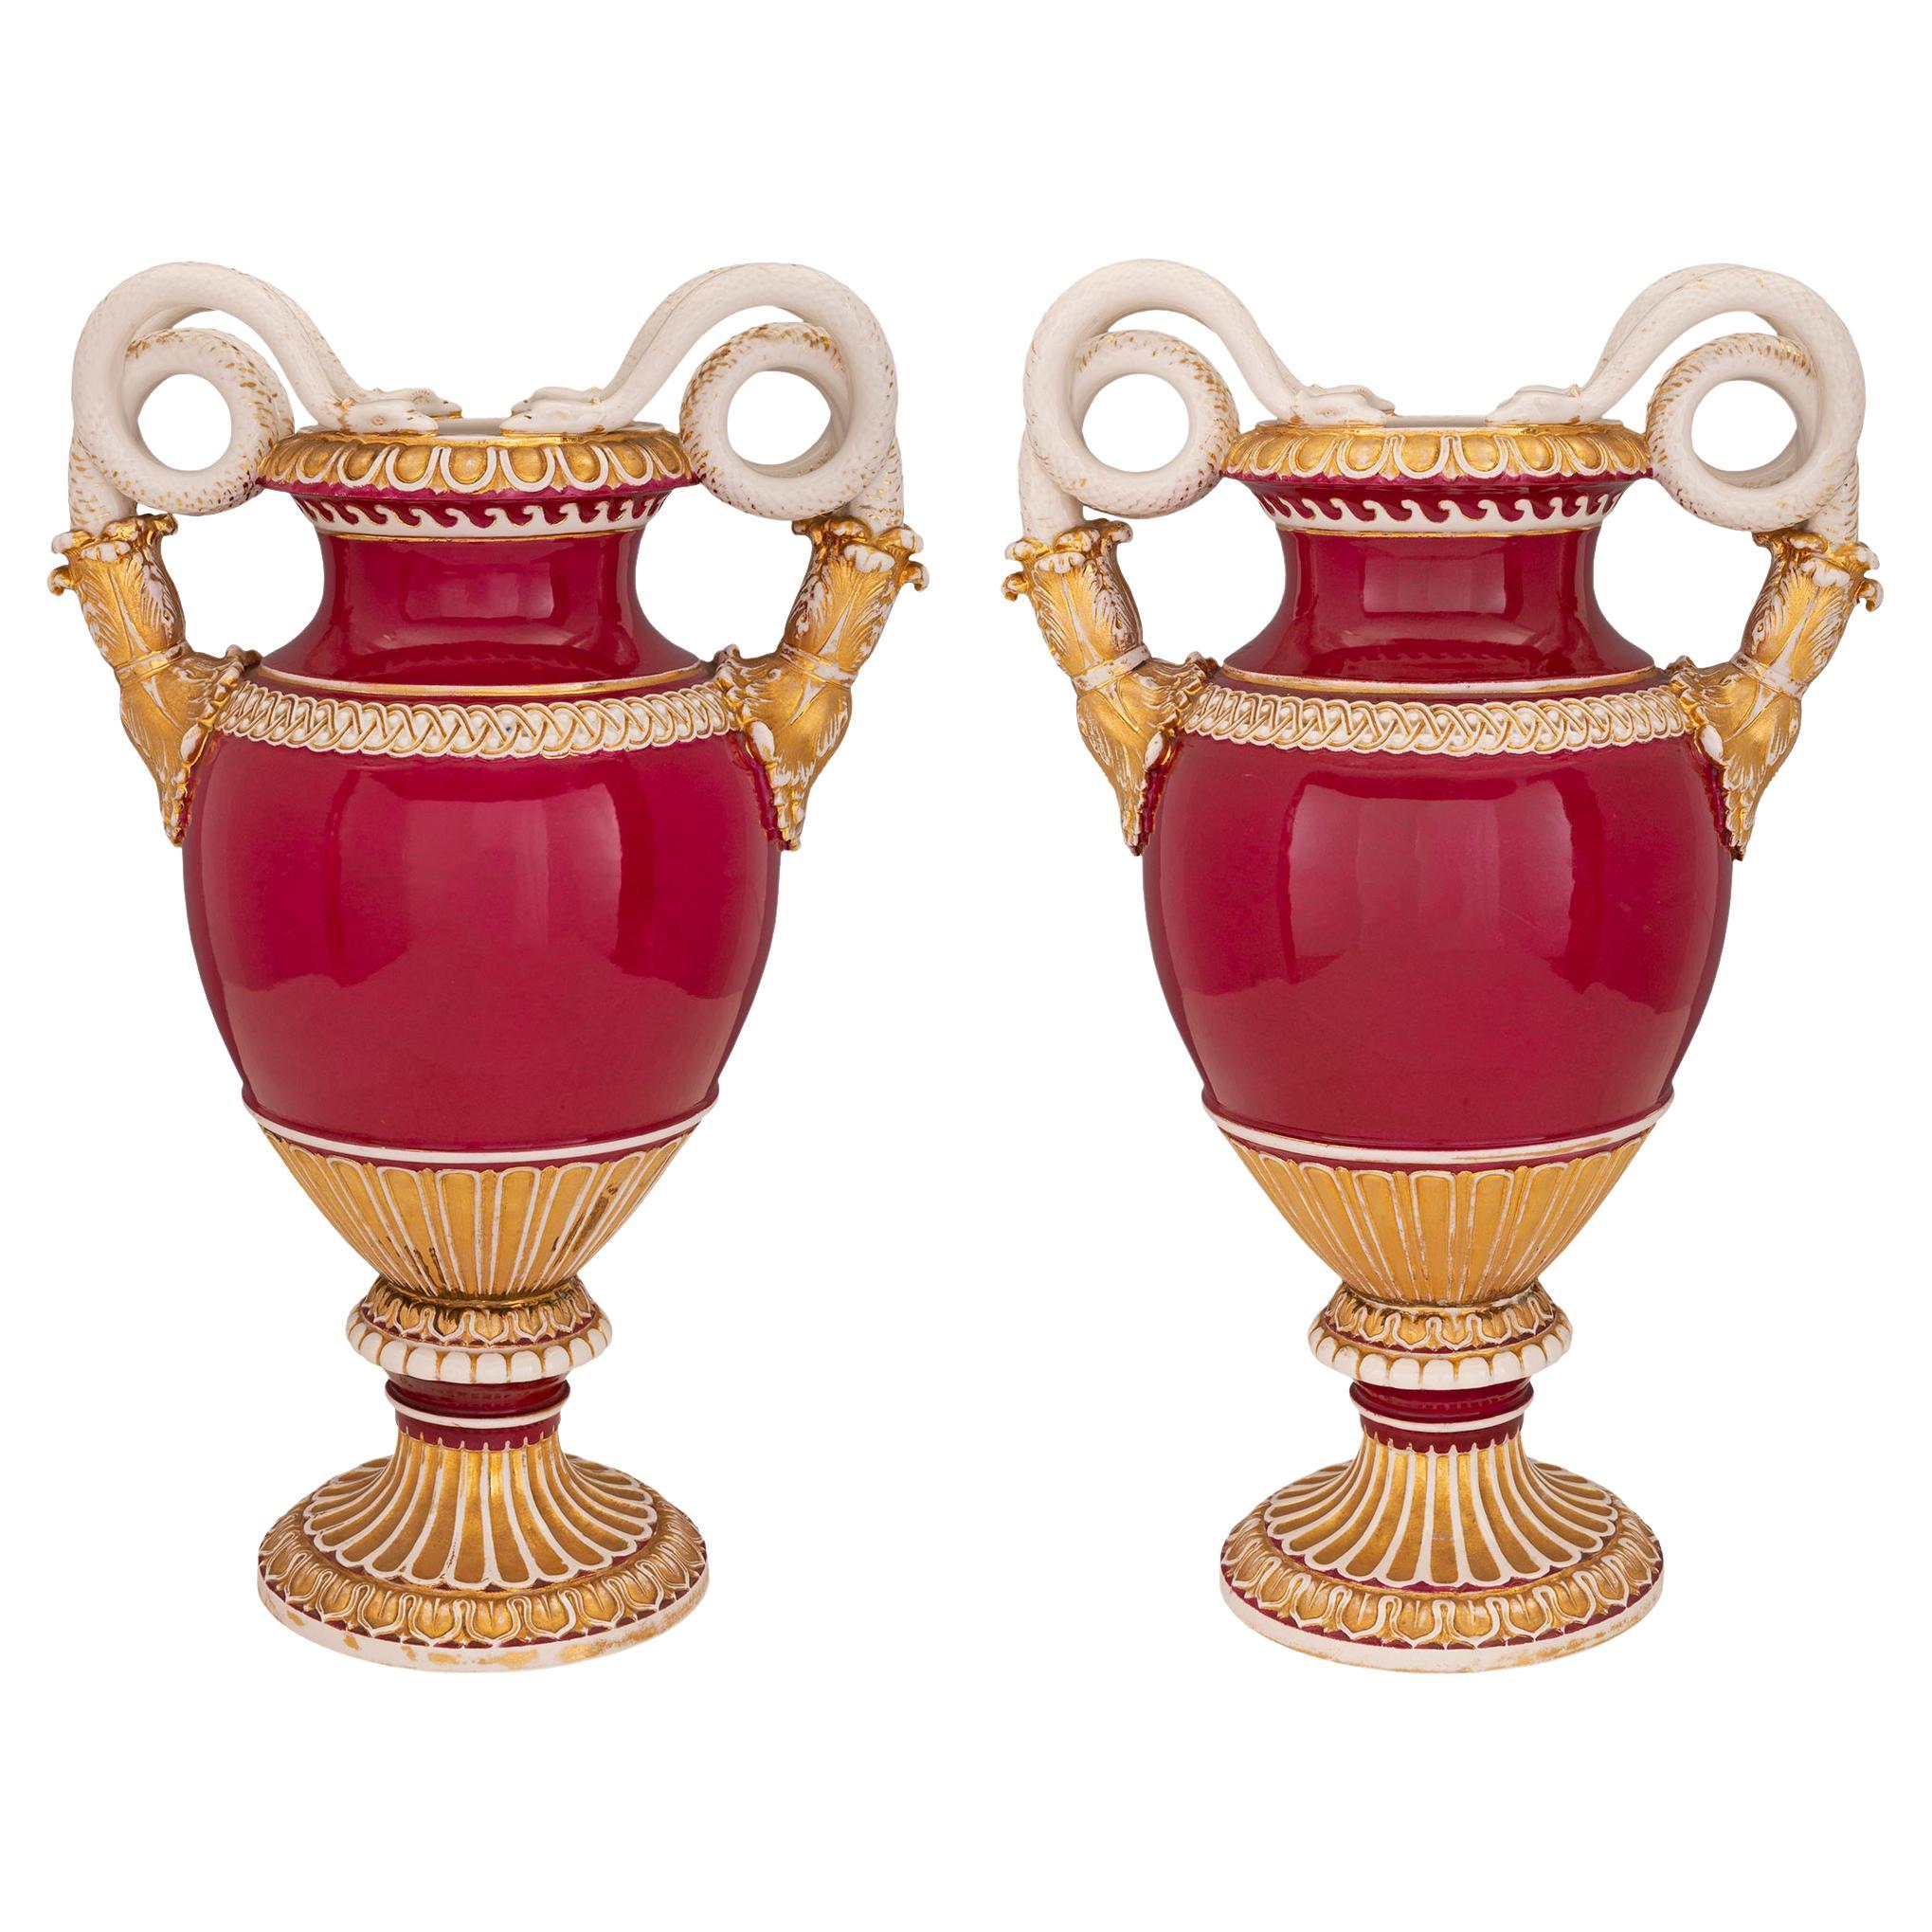 Pair of German 19th Century Neo-Classical St. Meissen Porcelain Urns For Sale